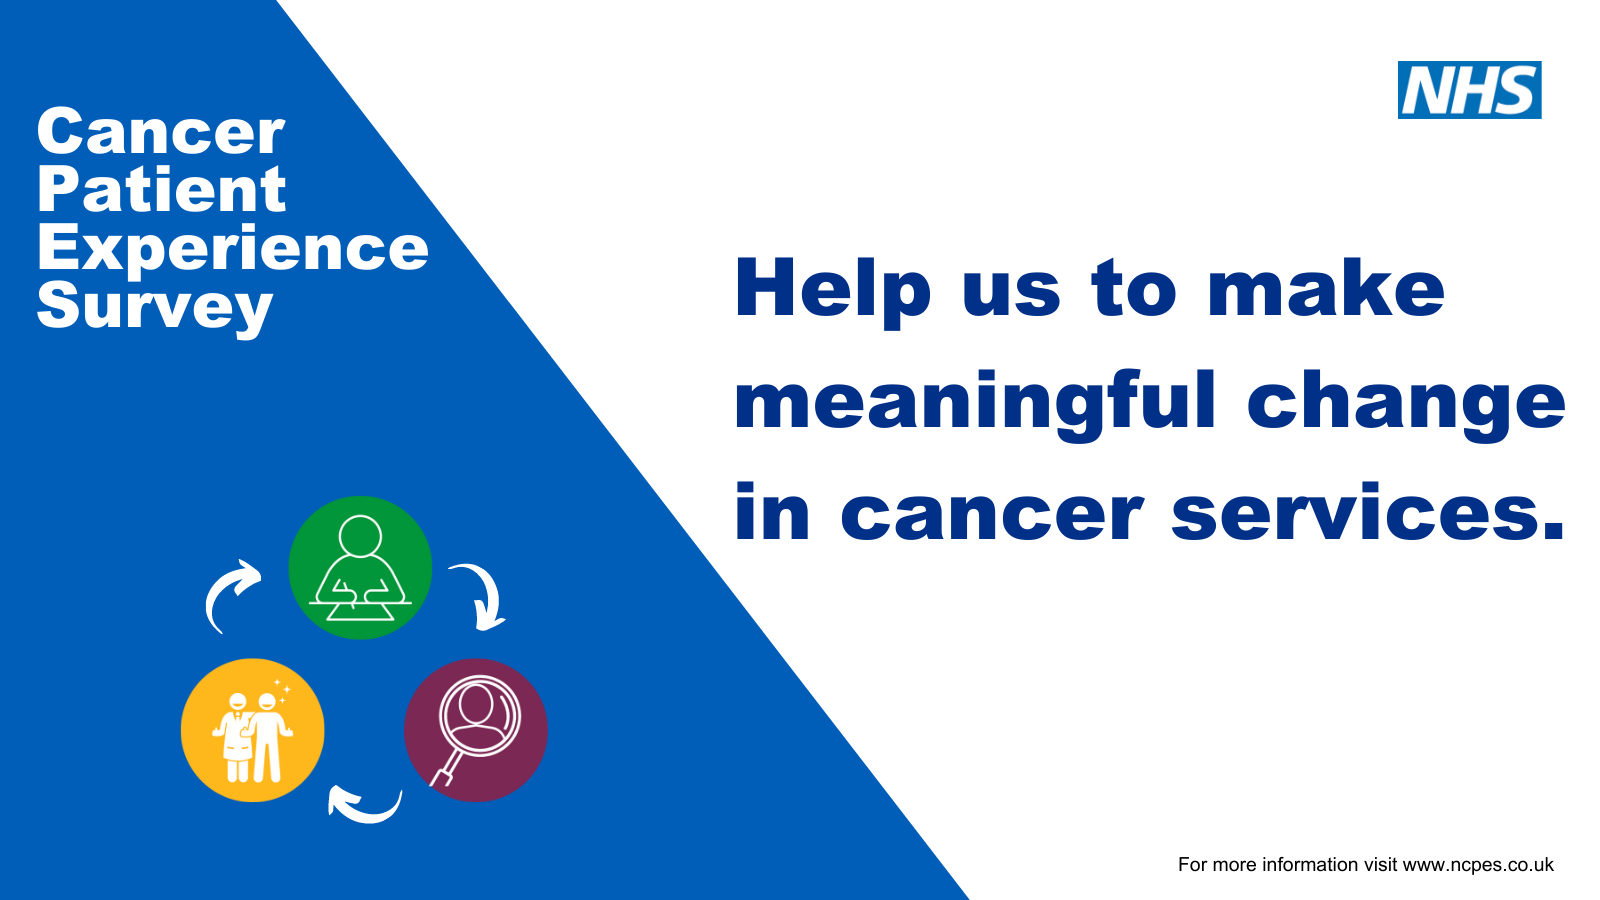 Cancer Patient Experience Survey. Help us to make meaningful changes in cancer services.